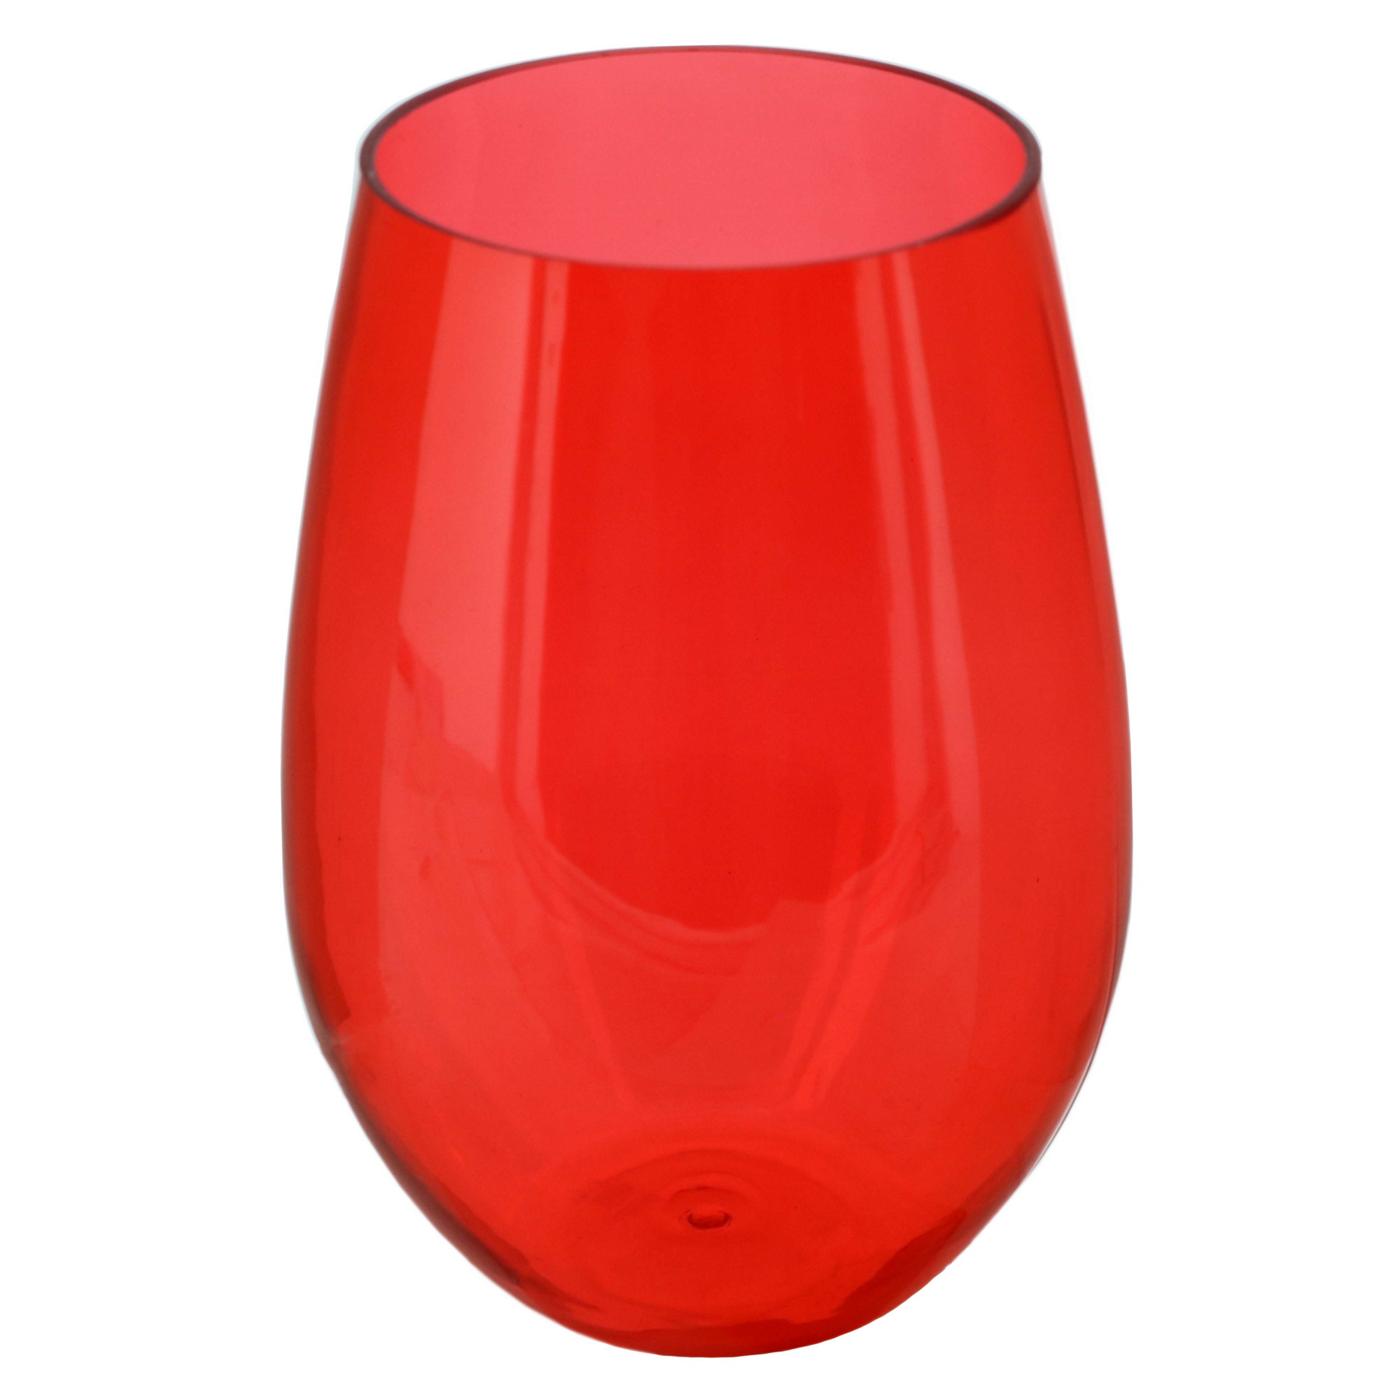 Dining Style Summer Stemless Wine; image 3 of 3